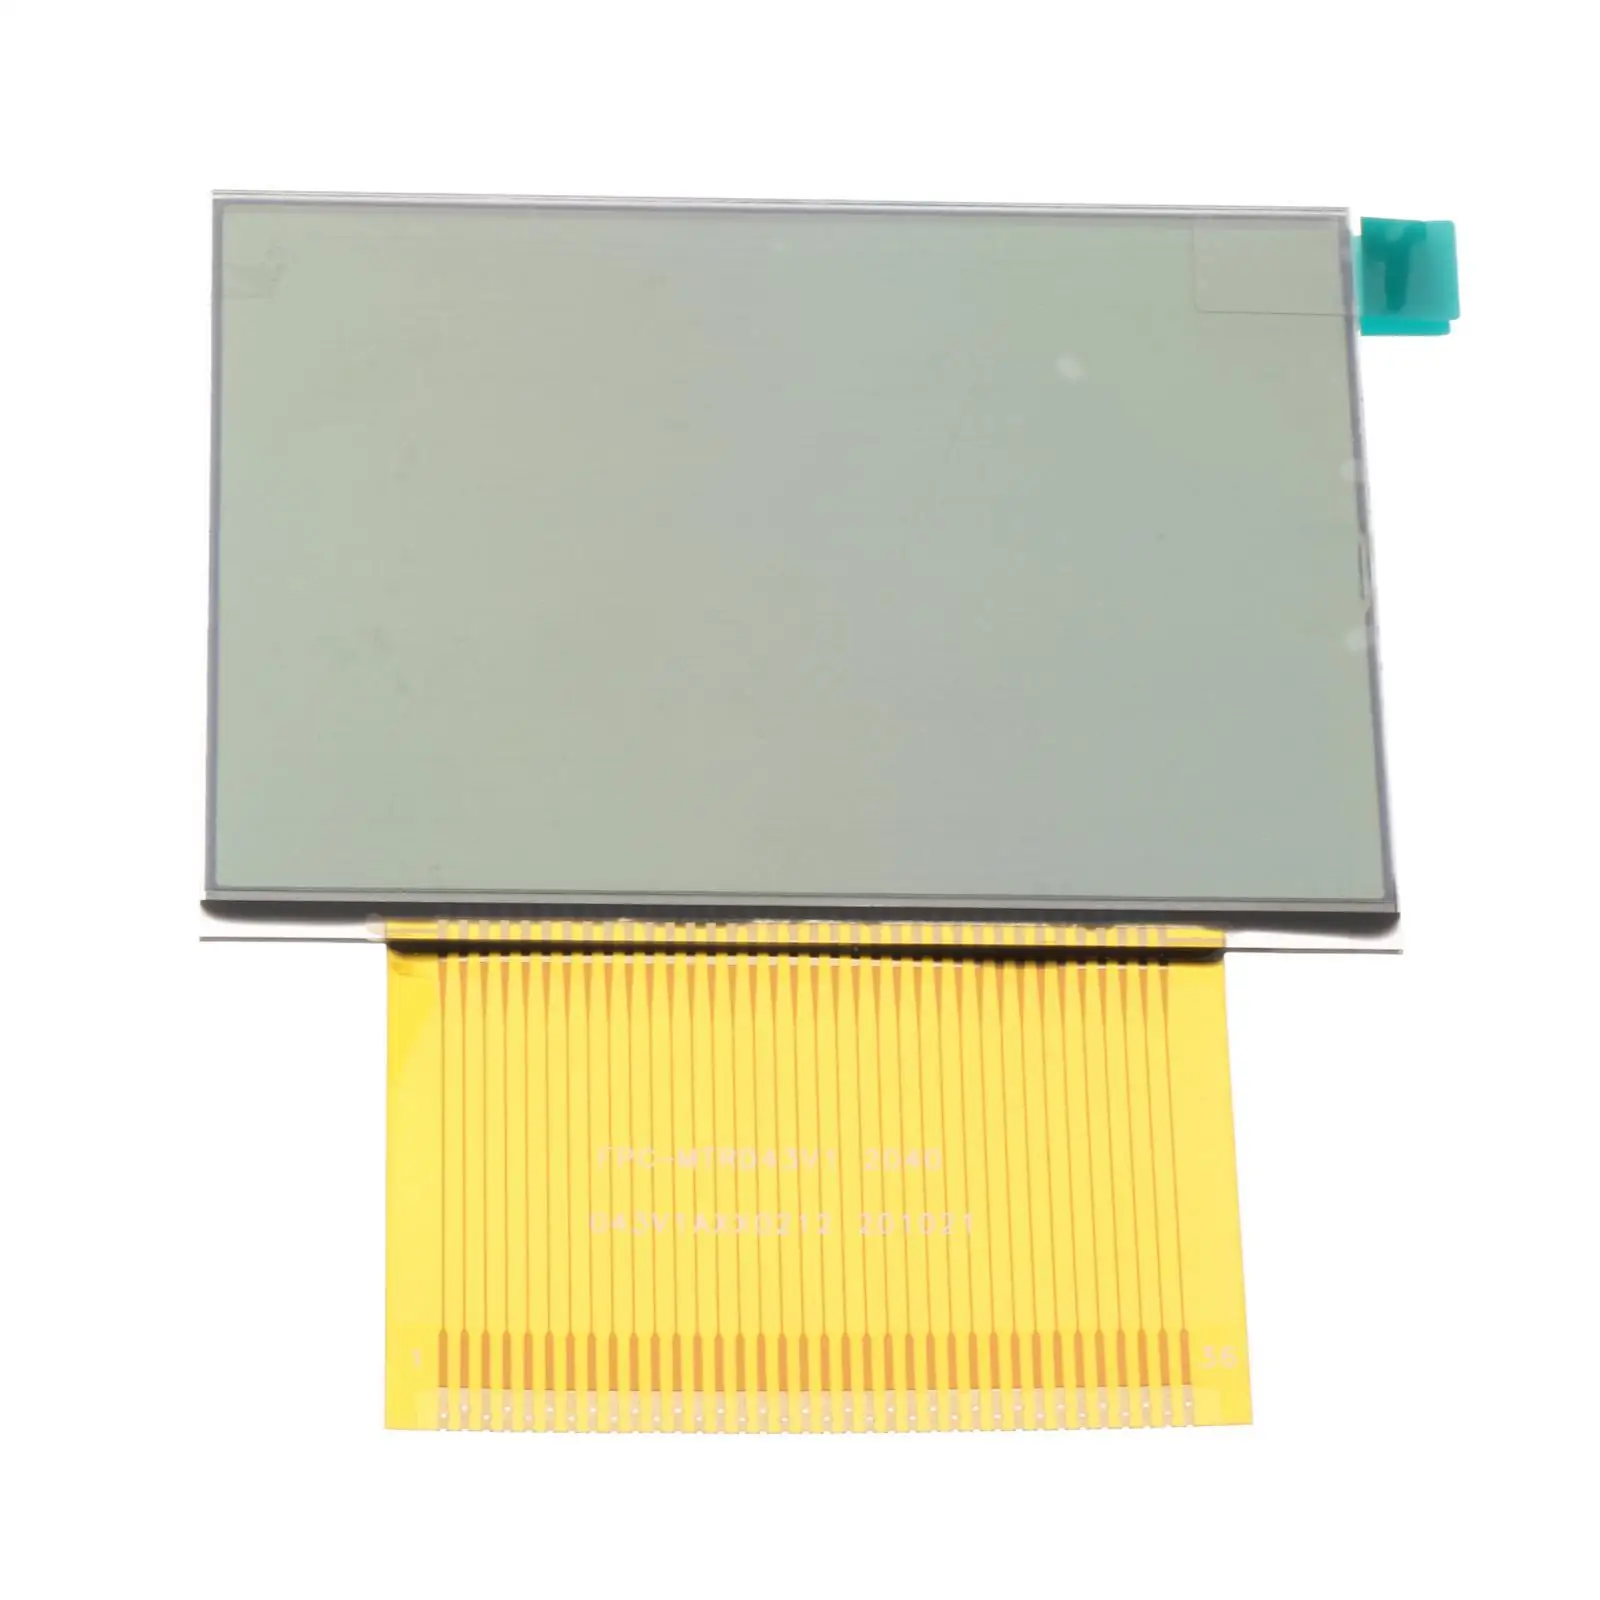 Durable LCD Display Spare Parts Replace for 6320SE 6610 6120